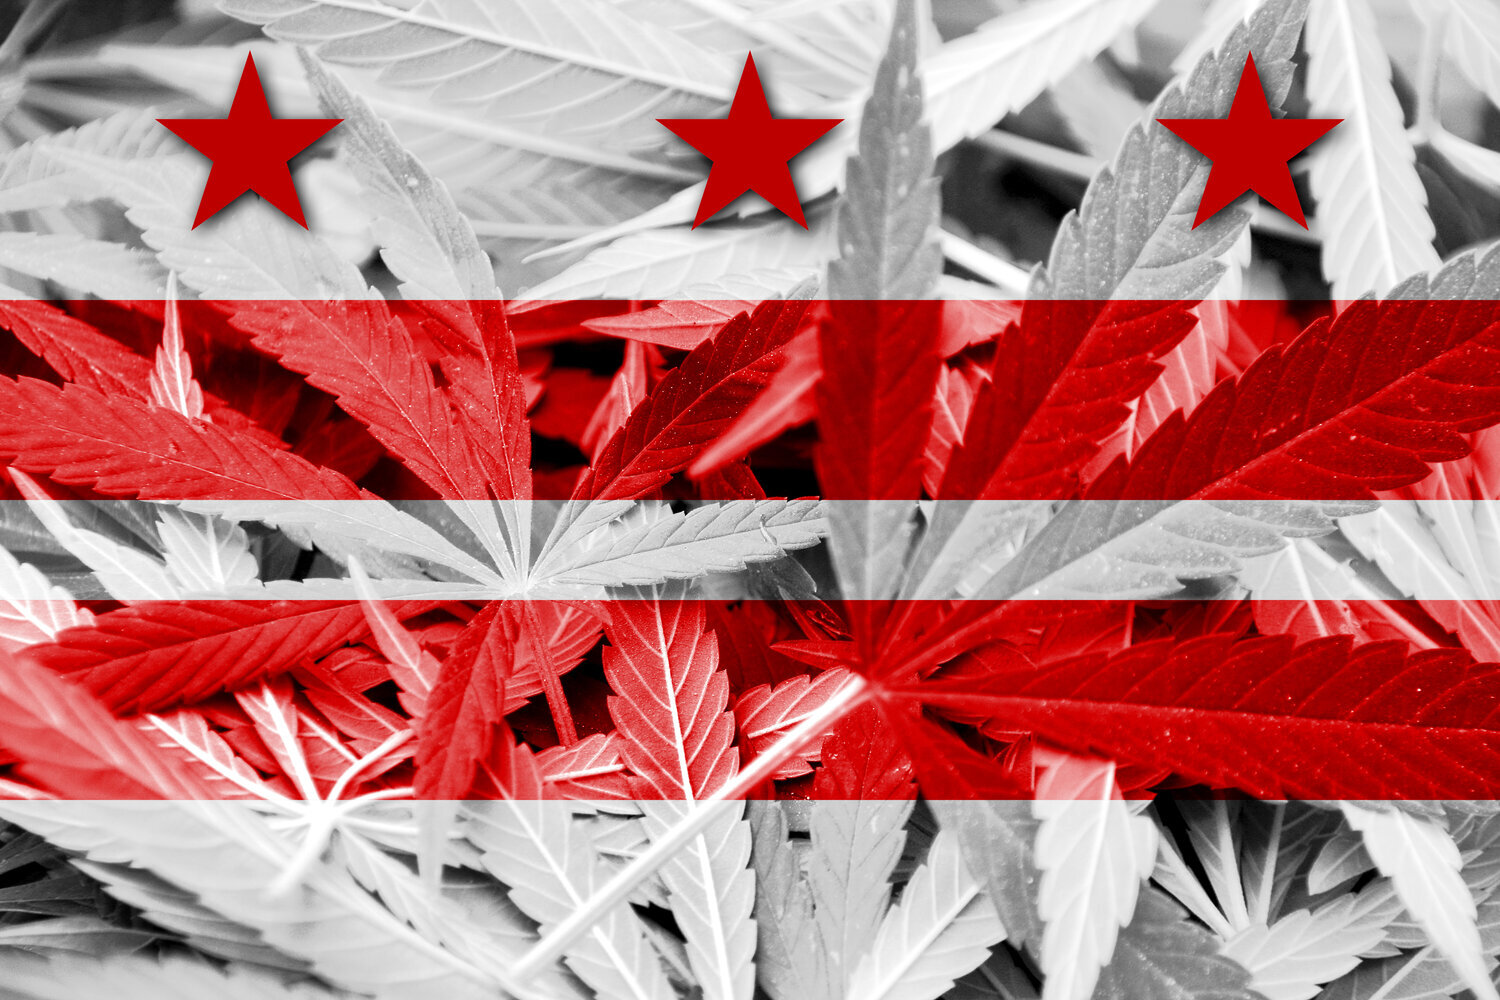 The D.C.’s Cannabis Industry’s Downsides, According to Locals